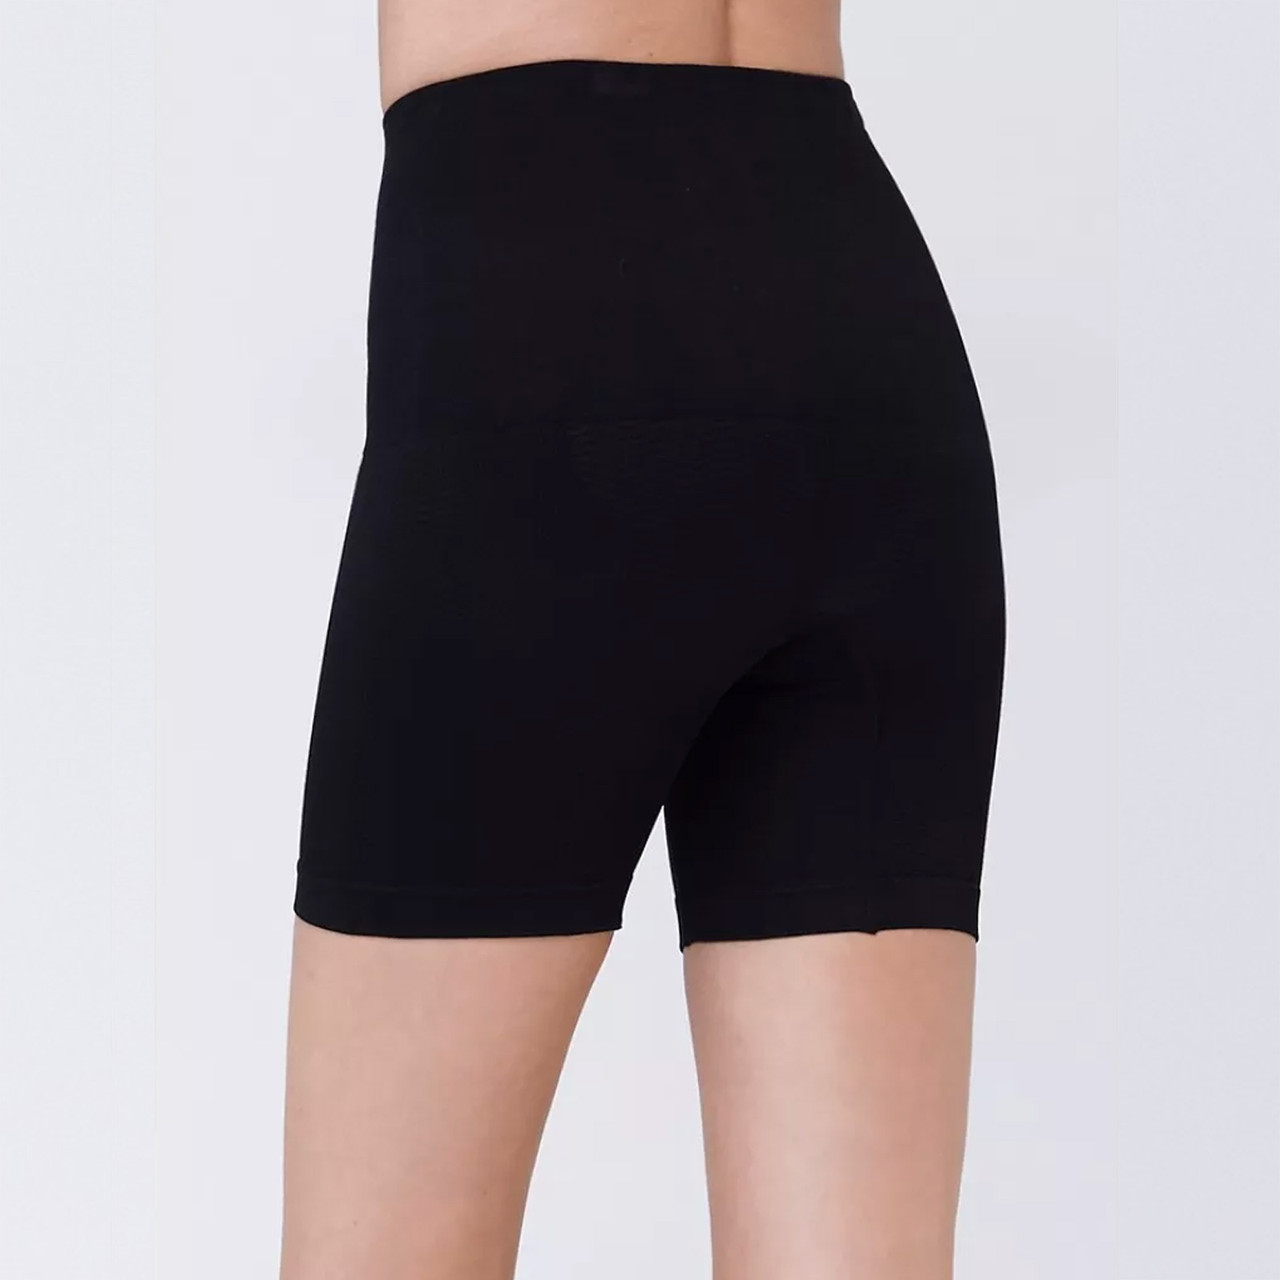 Ripe Maternity Black Seamless Recovery Shorts | Buy Post Pregnancy Support